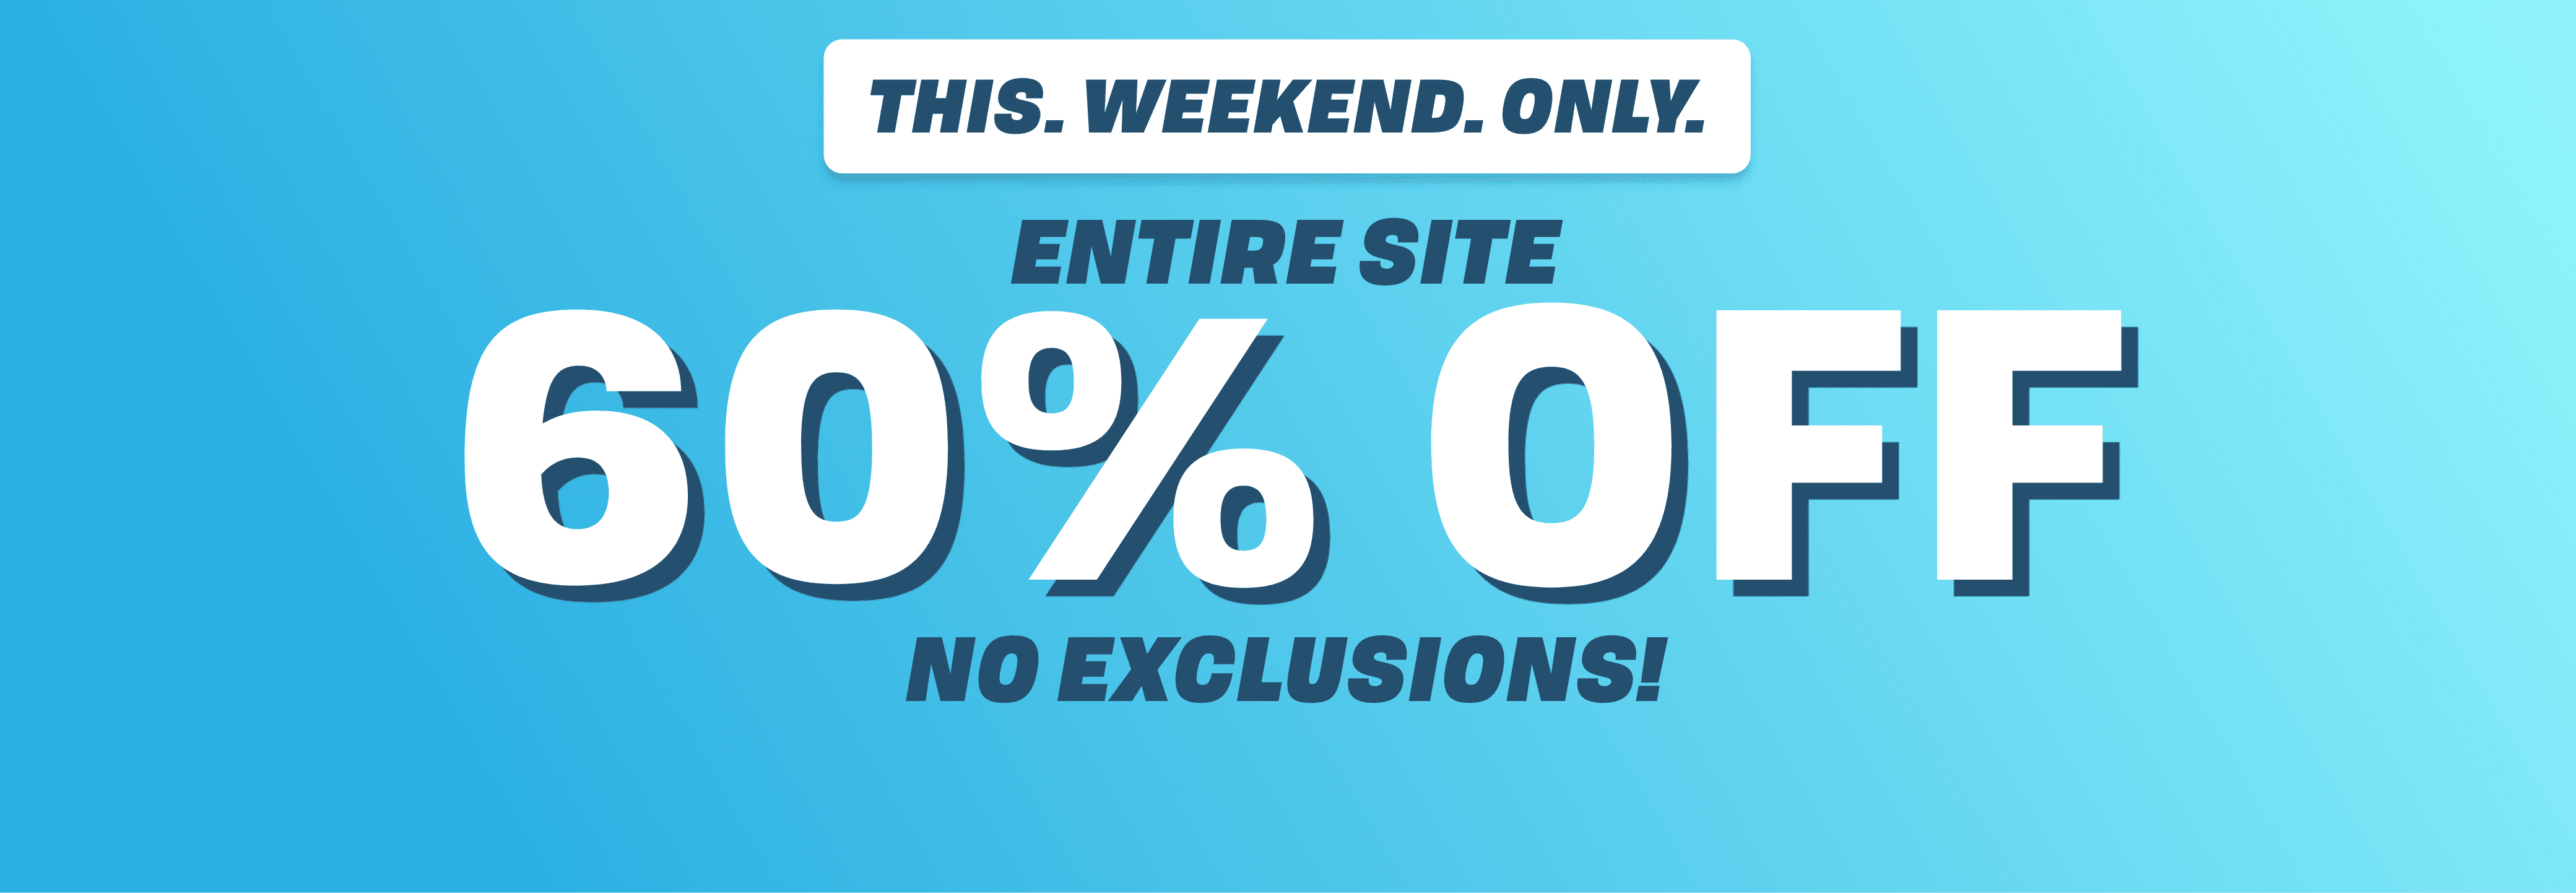 THIS WEEKEND ONLY ENTIRE SITE 60% OFF | No Exclusions 